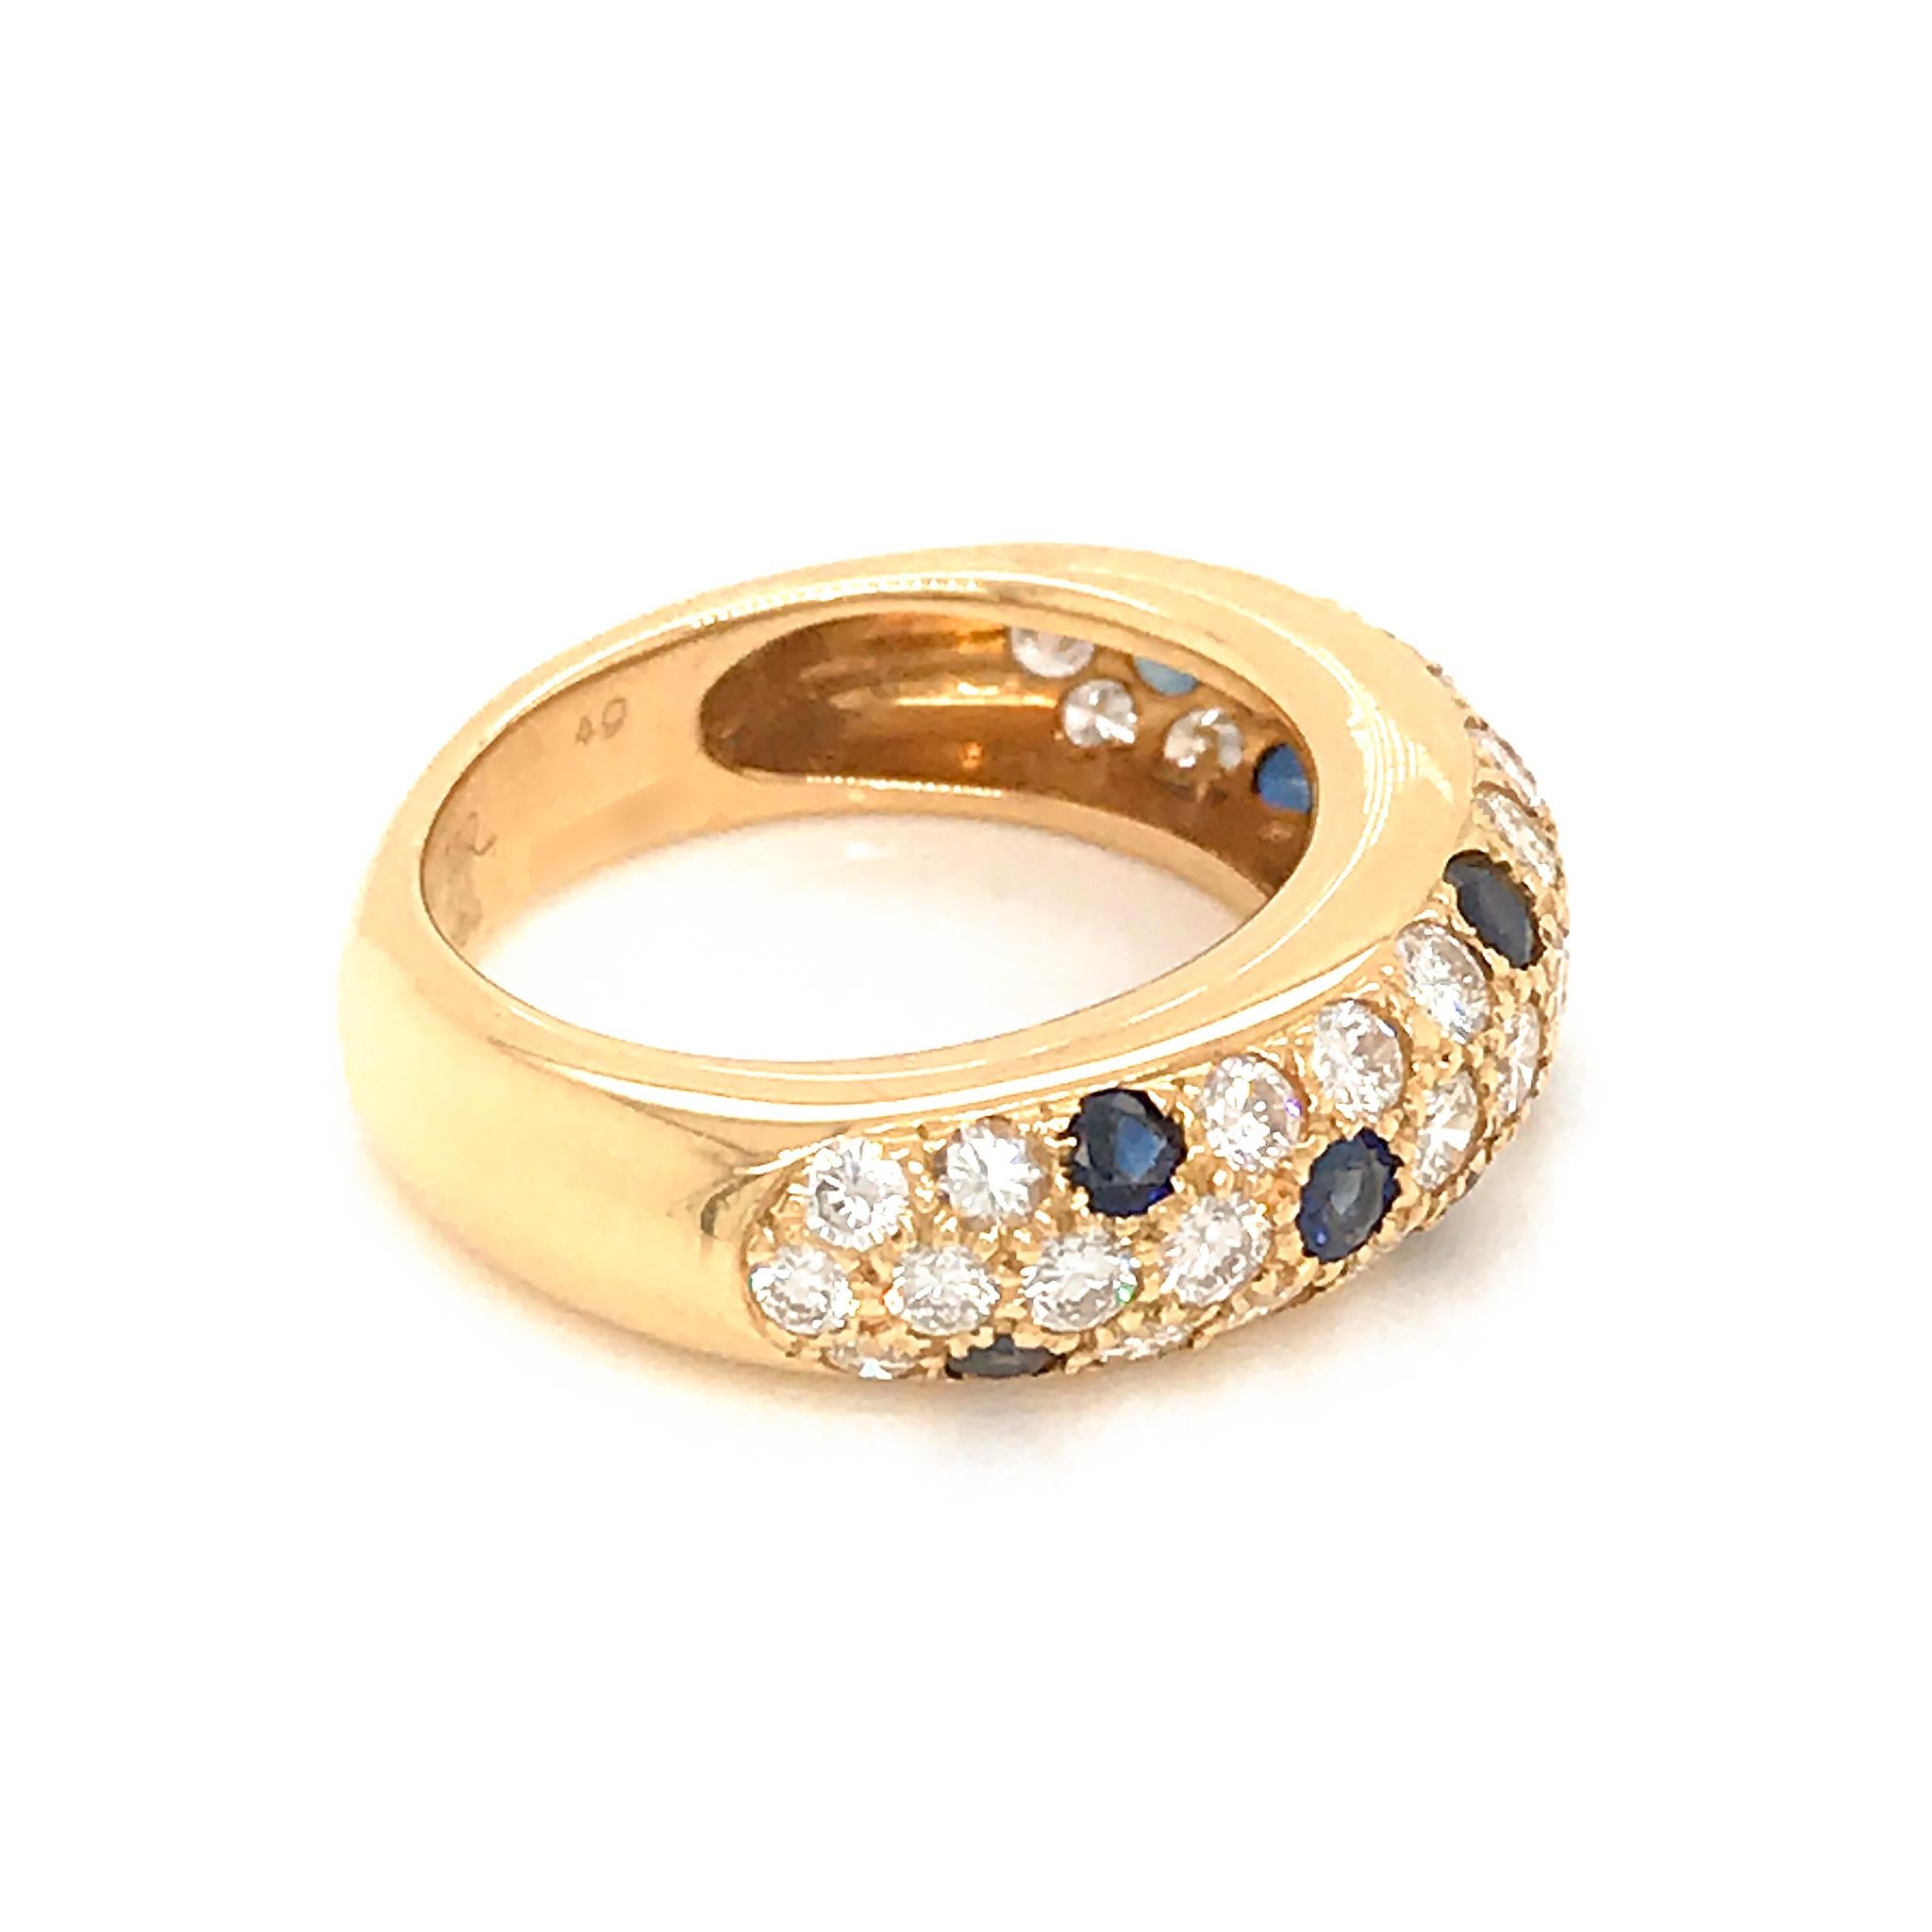 Featuring the ever-enchanting combination of charming 18K yellow gold and lovely appeal of splendid white diamonds and feminine blue sapphires, this spectacular ring from renowned Cartier boasts exceptional design, offering dazzling feminine